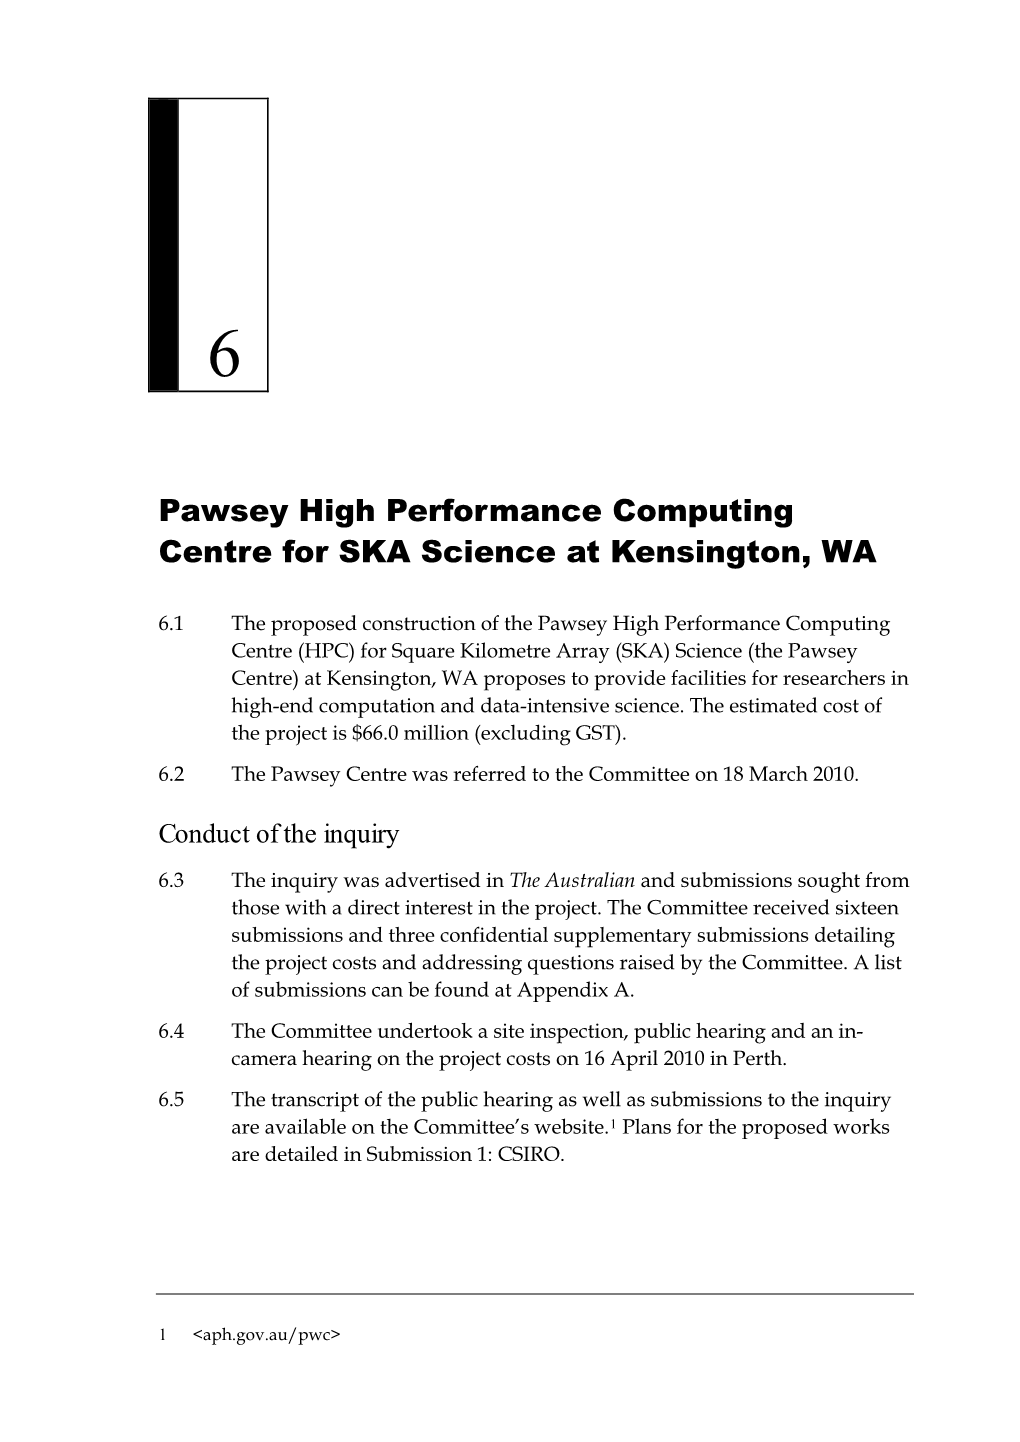 Chapter 6: Pawsey High Performance Computing Centre for SKA Science